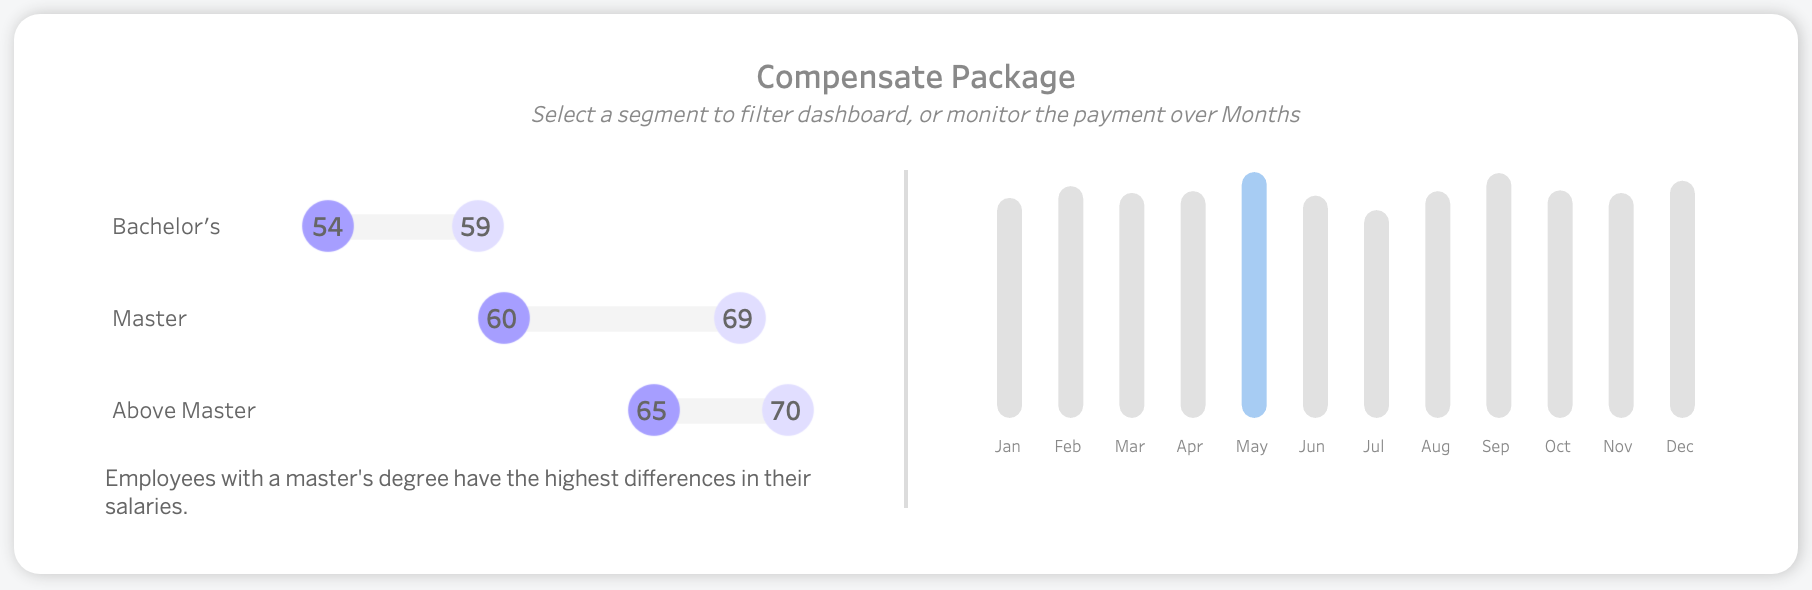 Compensate Package in Tableau